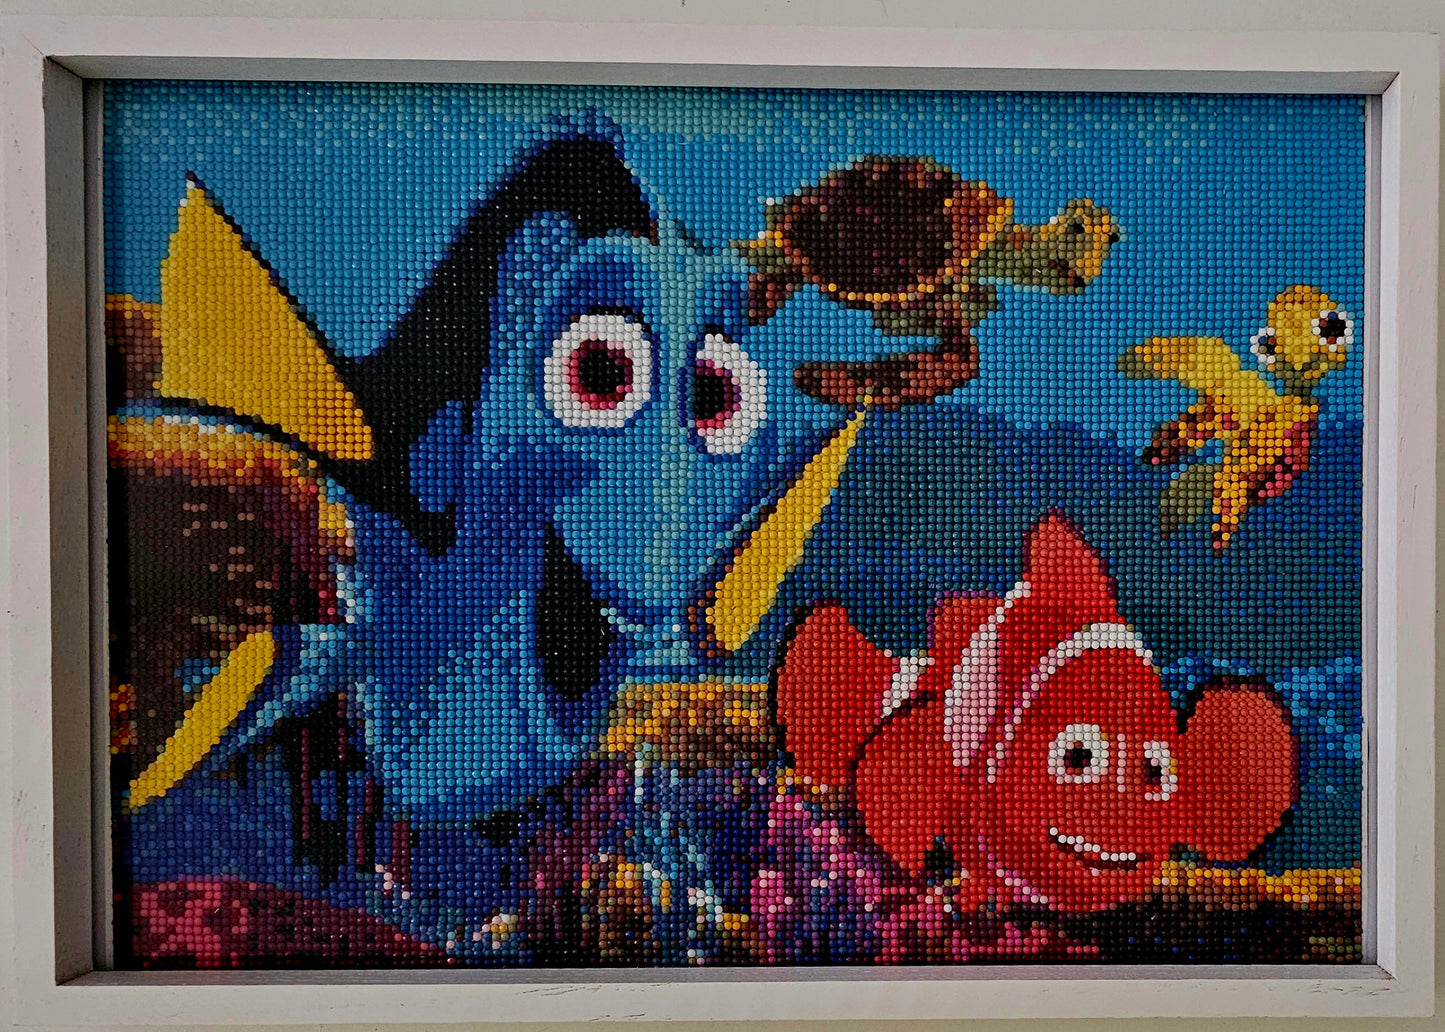 Groovy baby framed artwork - Nemo and friends